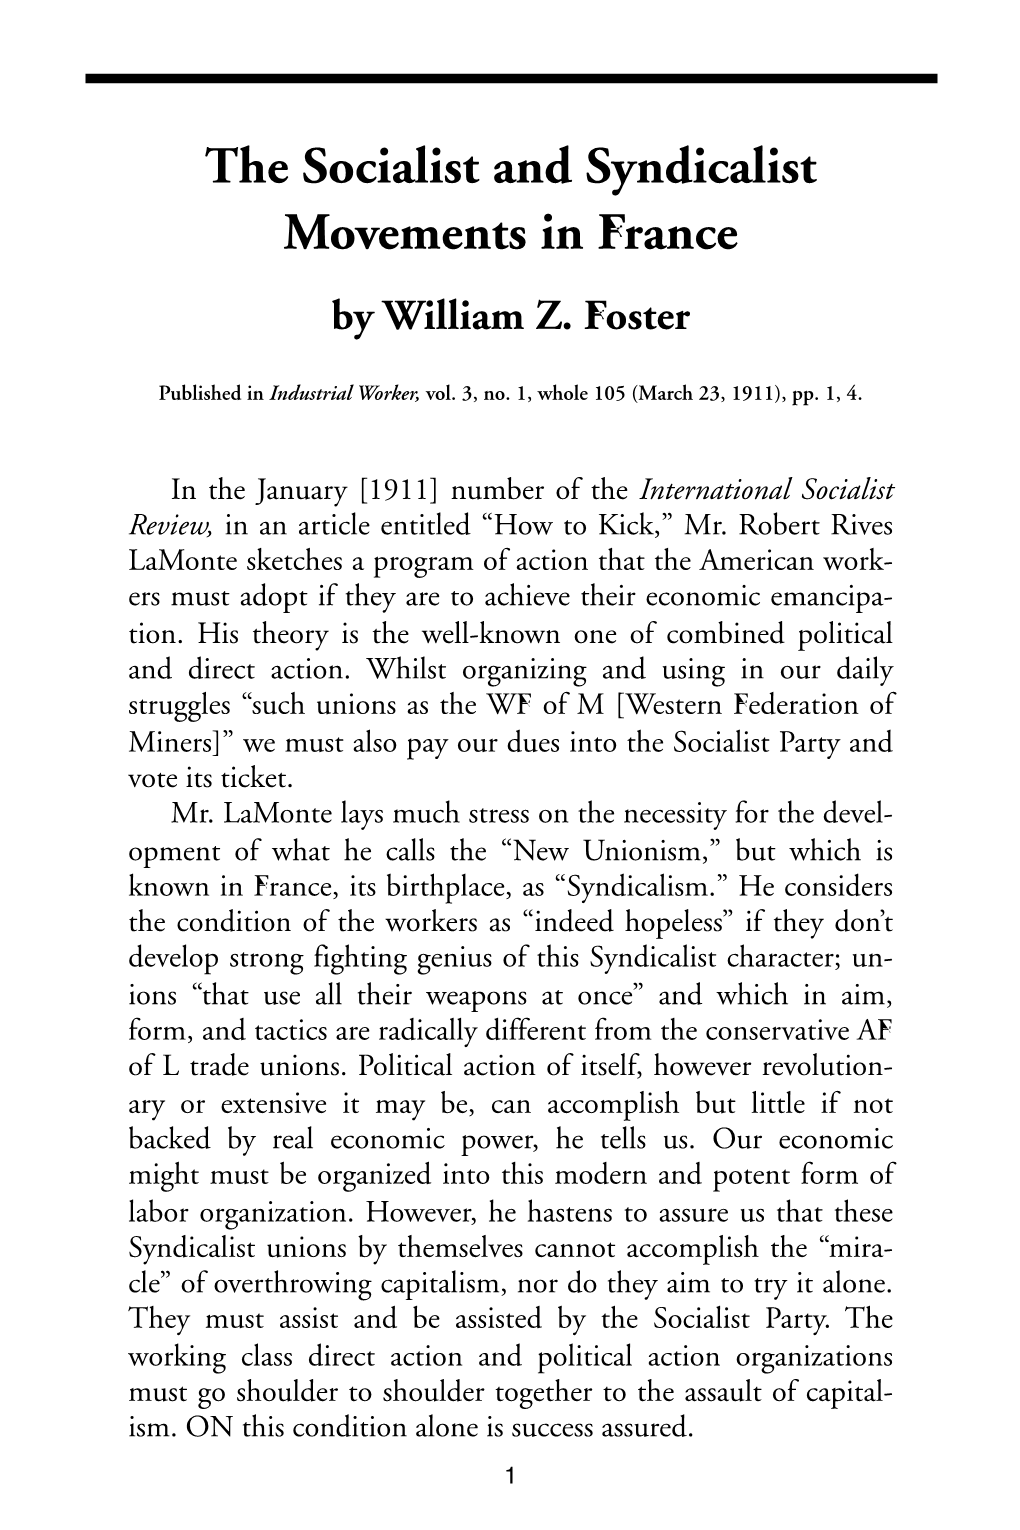 The Socialist and Syndicalist Movements in France by William Z